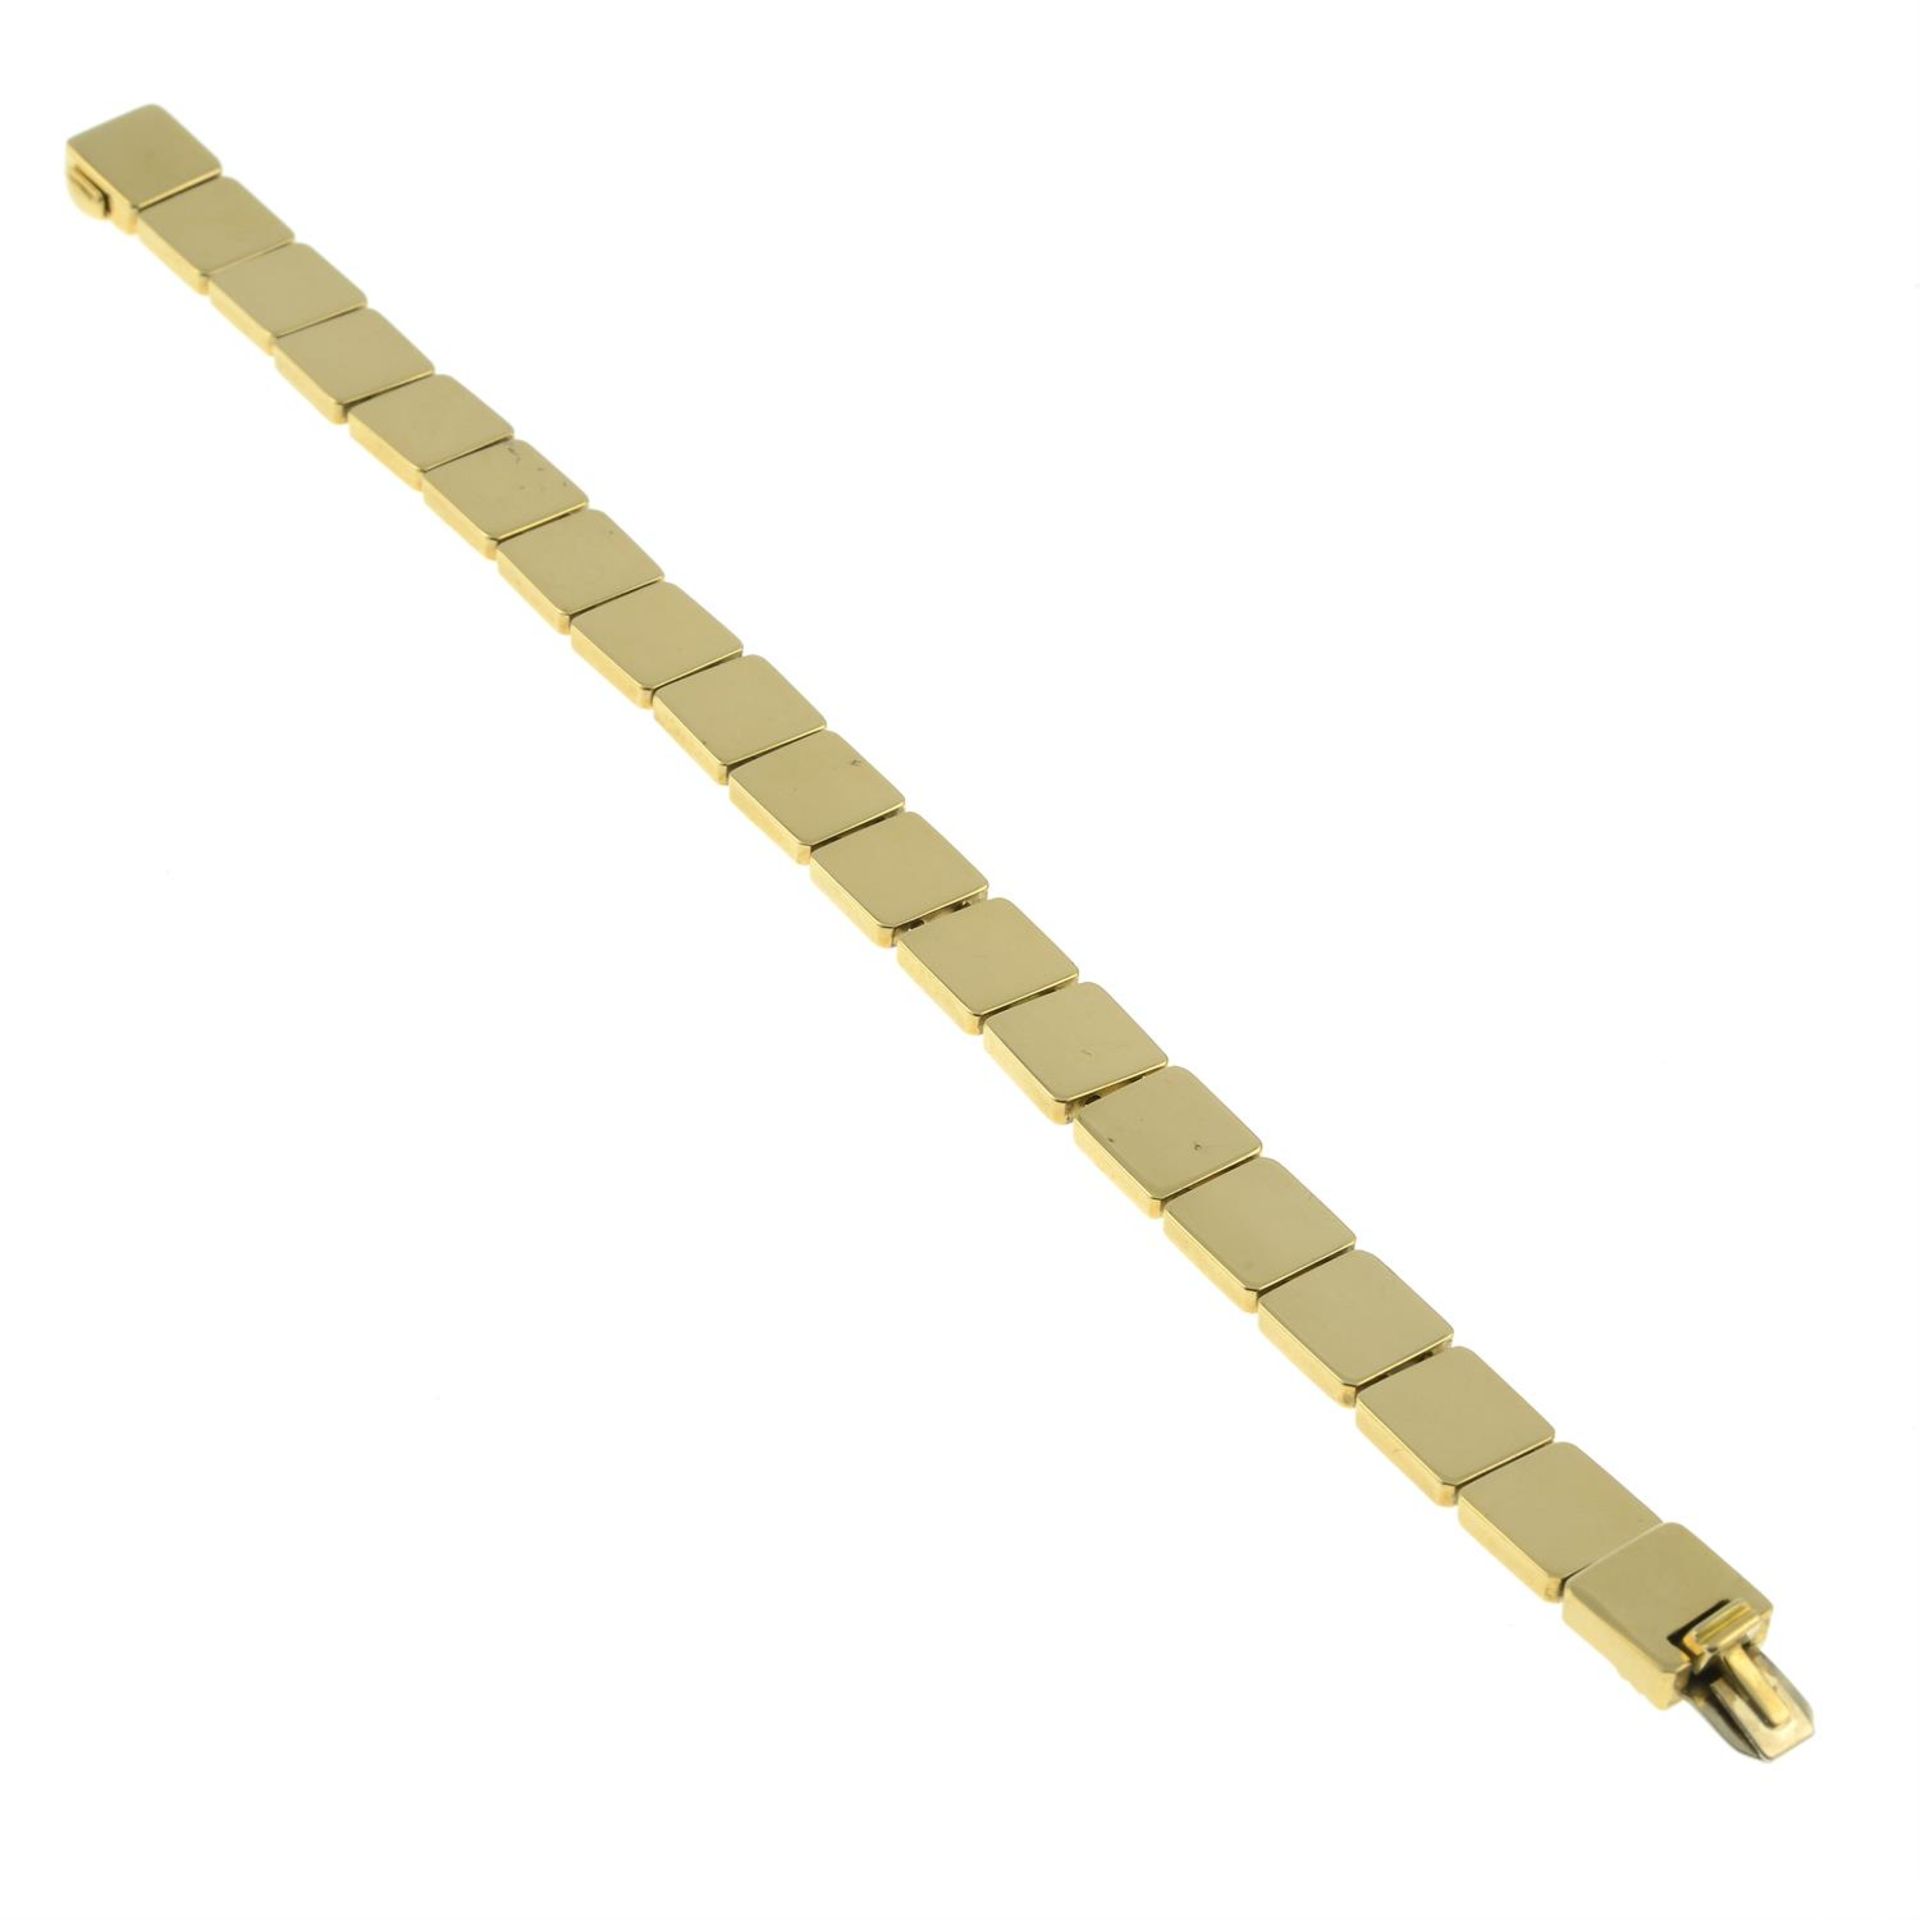 An 18ct gold square tile-link bracelet, by Tiffany and Co. - Image 4 of 5